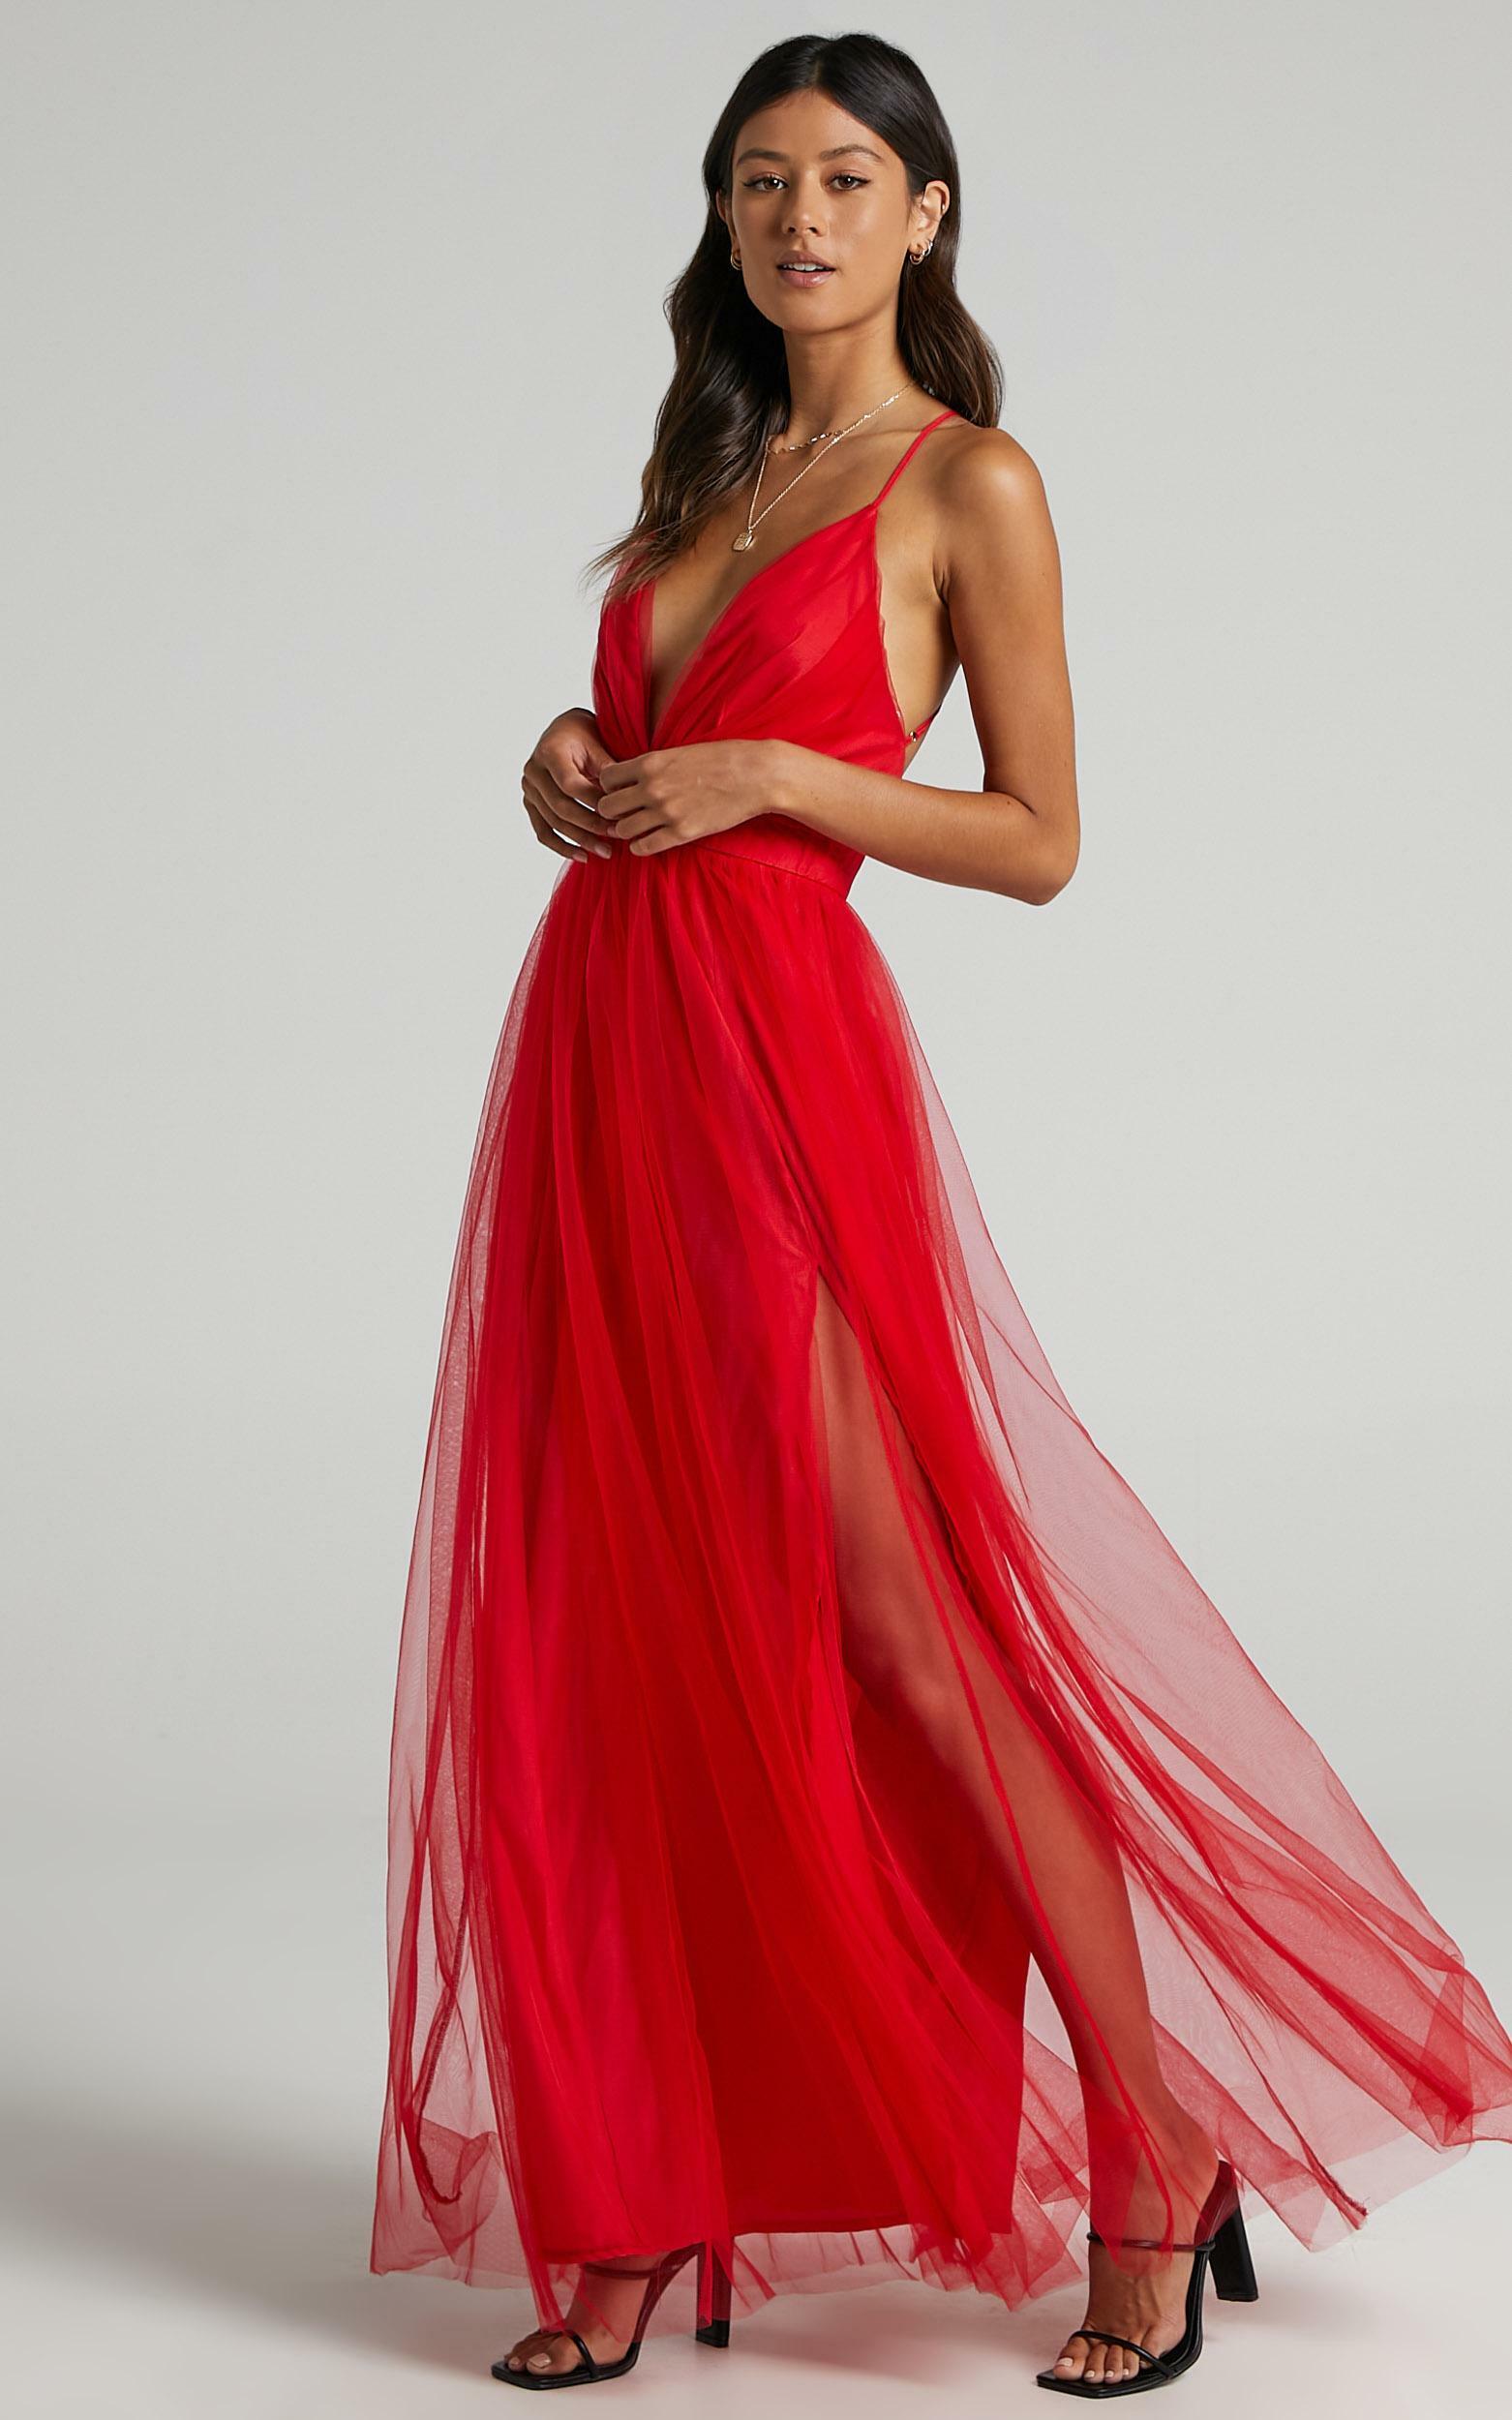 Tell Me Lies Dress in Red Tulle - 06, RED4, hi-res image number null